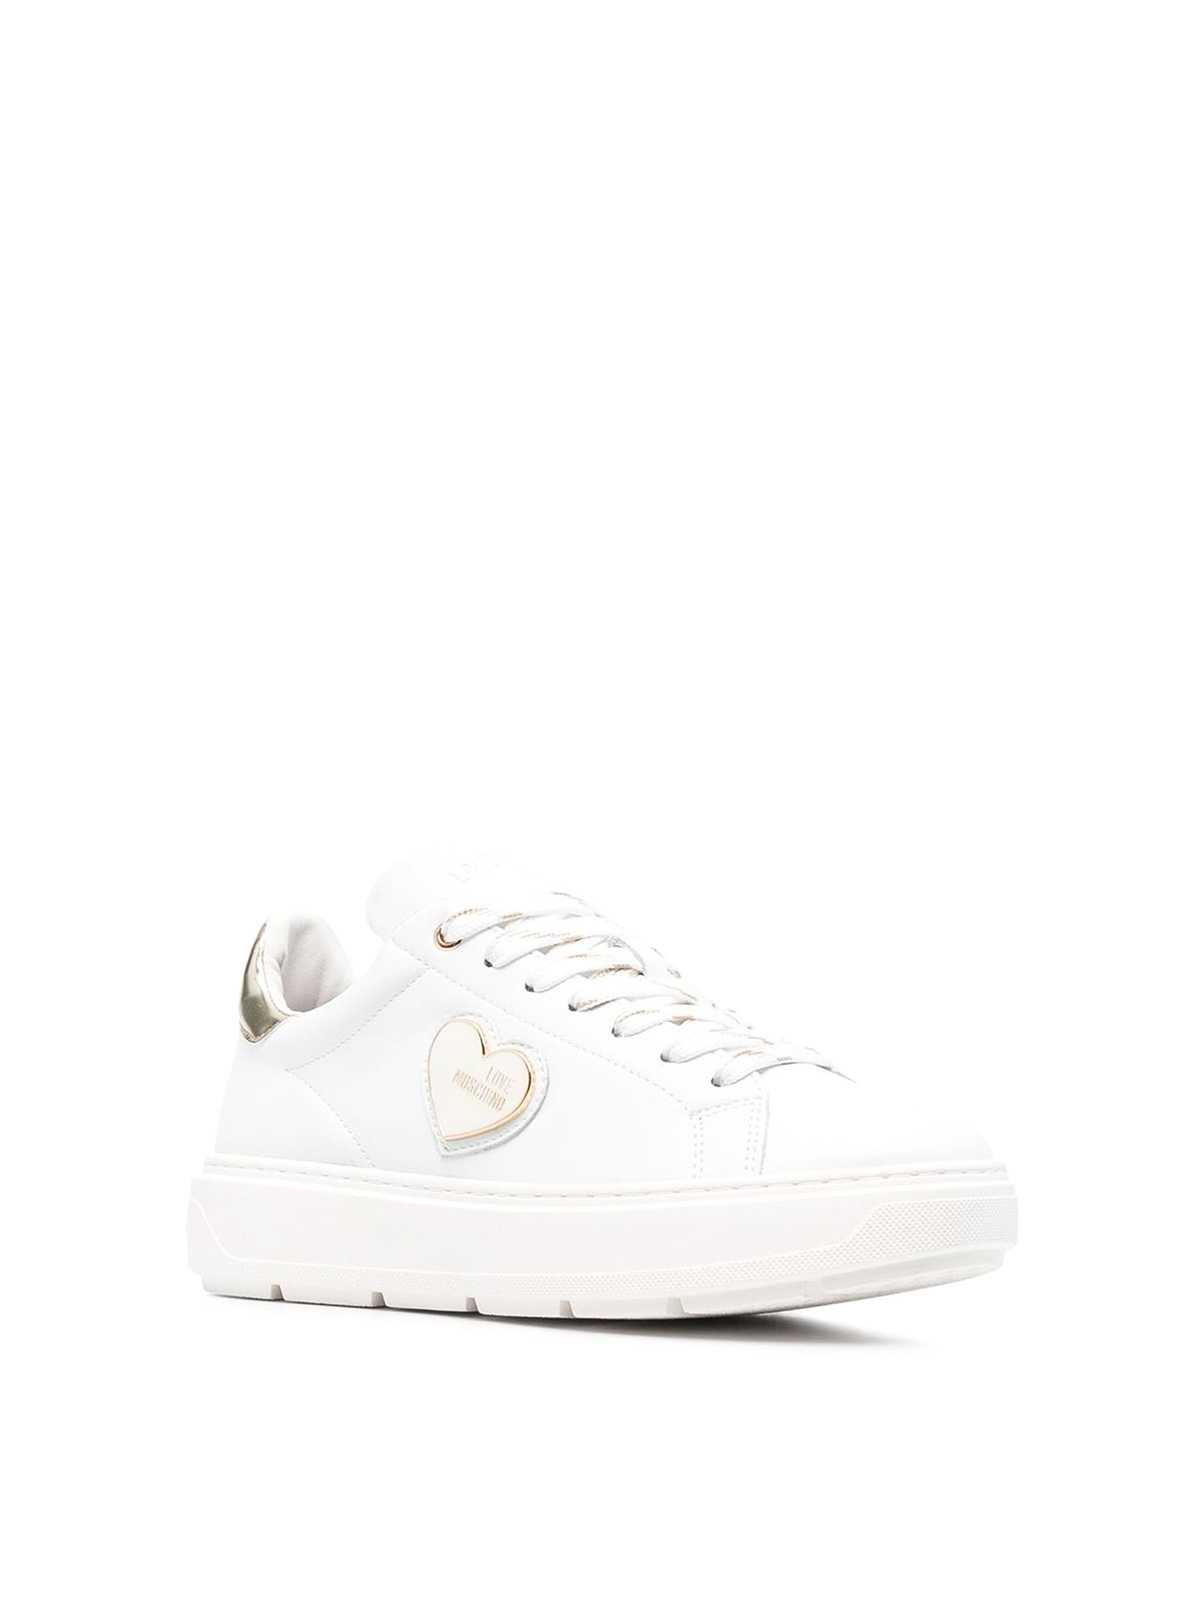 Buy LOUIS VUITTON BLACK WHITE TIME OUT SNEAKER FOR WOMEN - Online